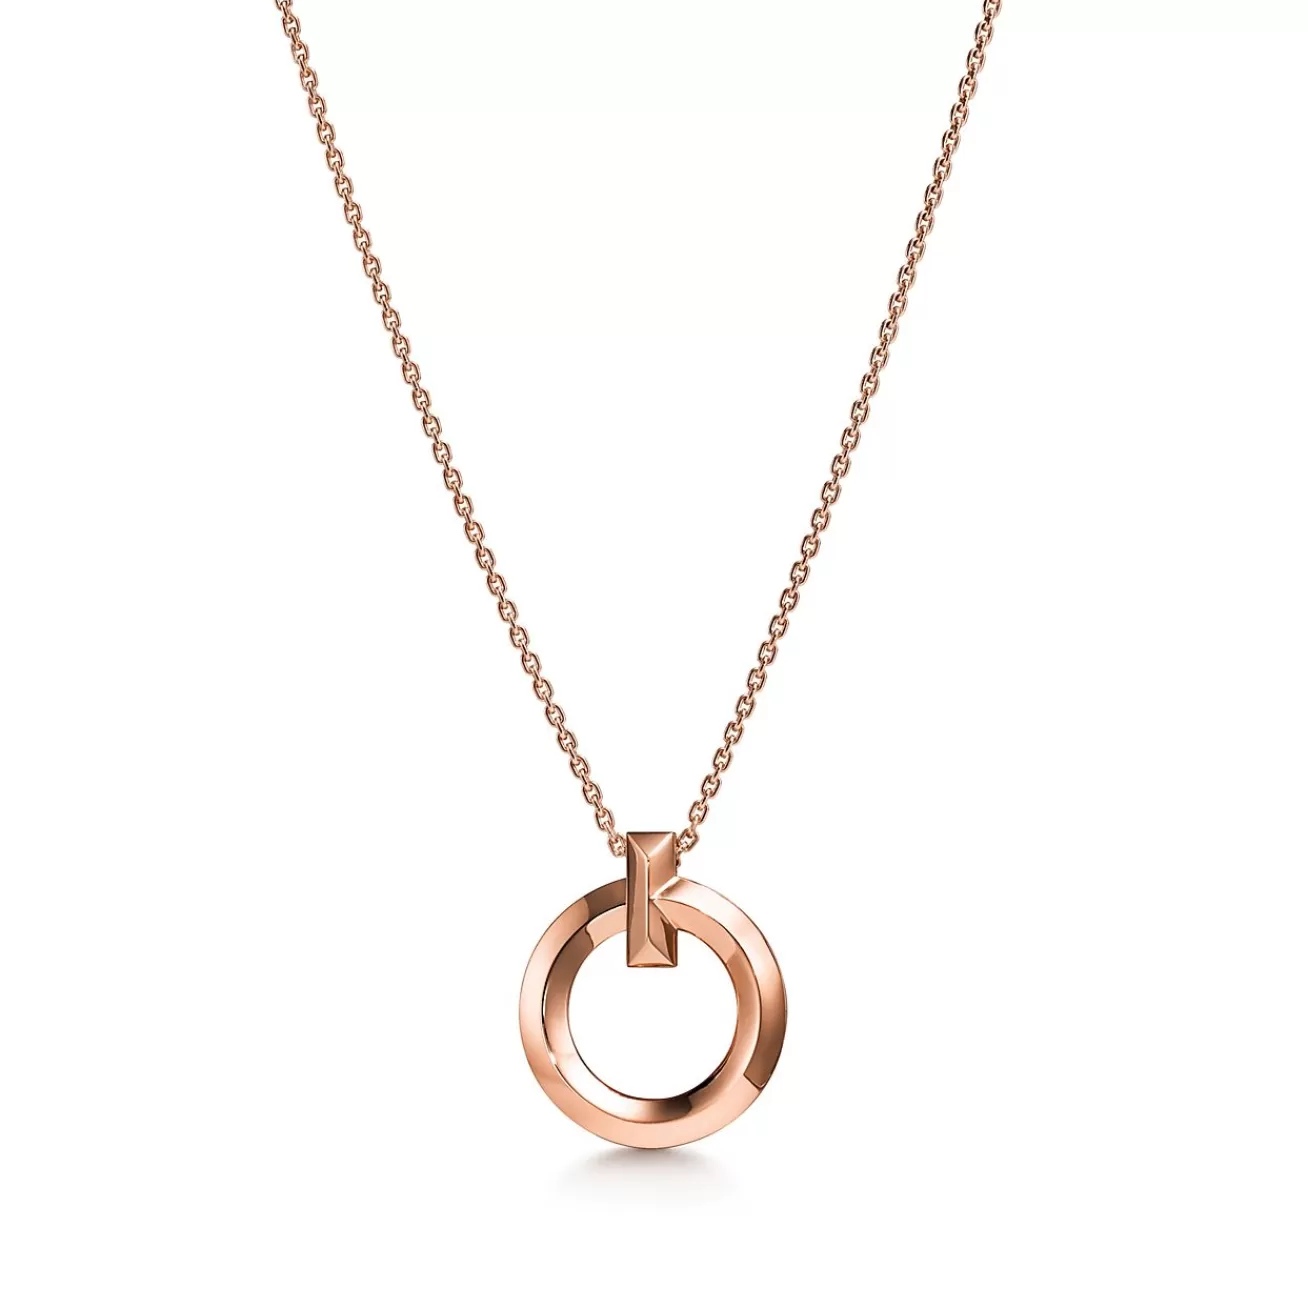 Tiffany & Co. Tiffany T T1 Circle Pendant in Rose Gold, Small | ^ Necklaces & Pendants | Rose Gold Jewelry